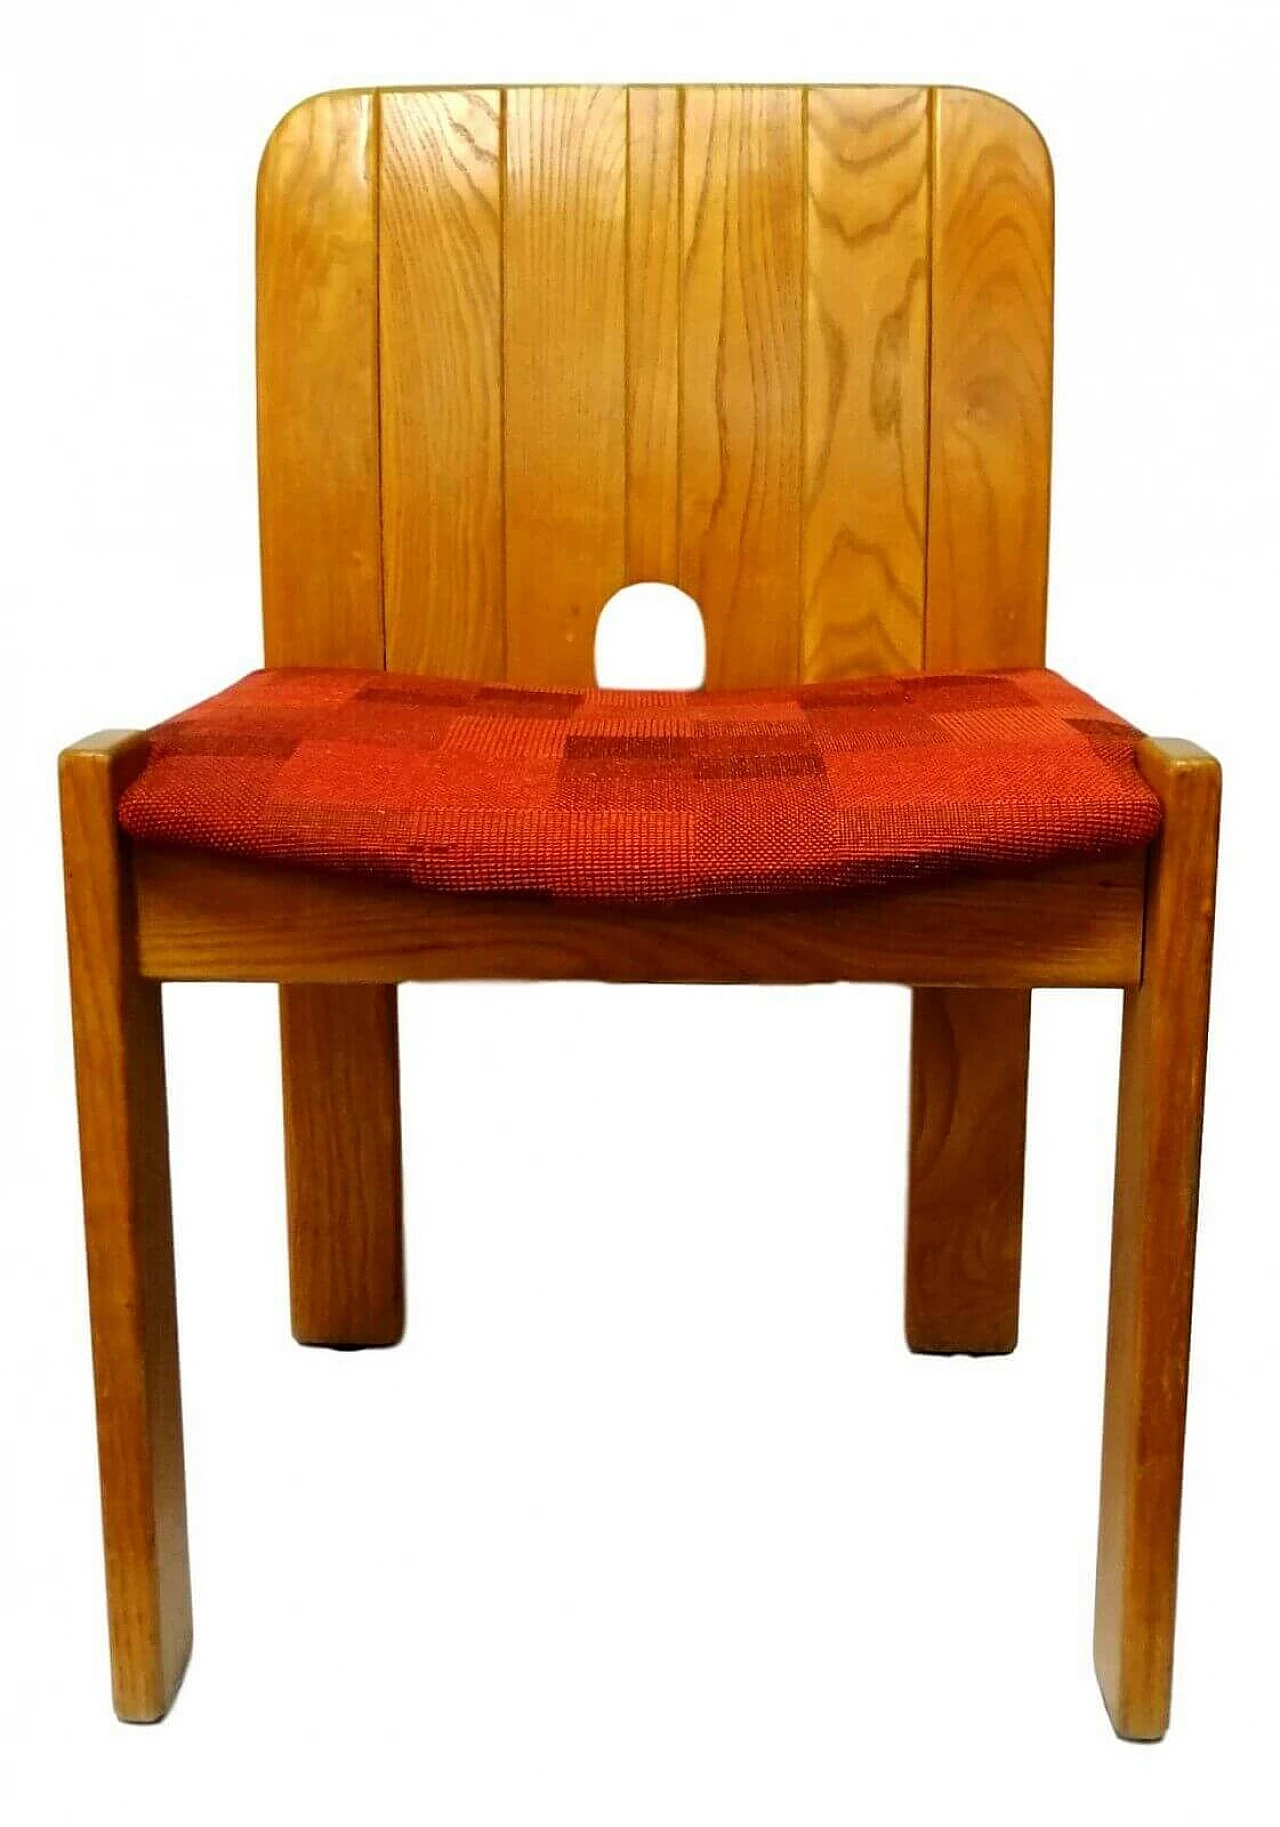 4 Design wooden chairs, 70s 1164511